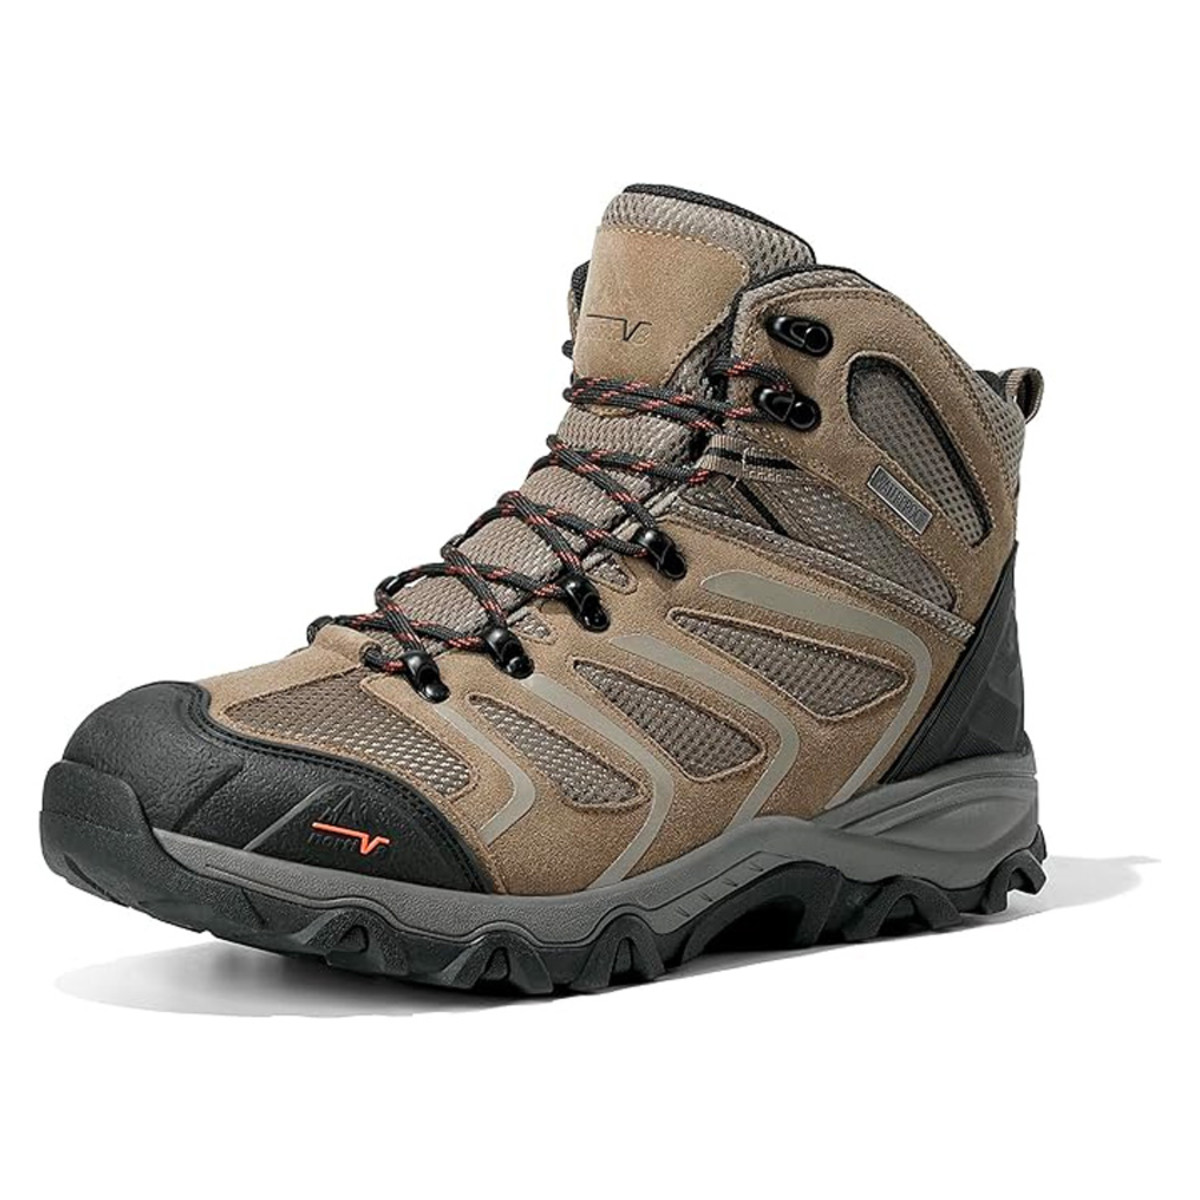 s No. 1 Bestselling Hiking Boot Is on Sale From $40 - Men's Journal